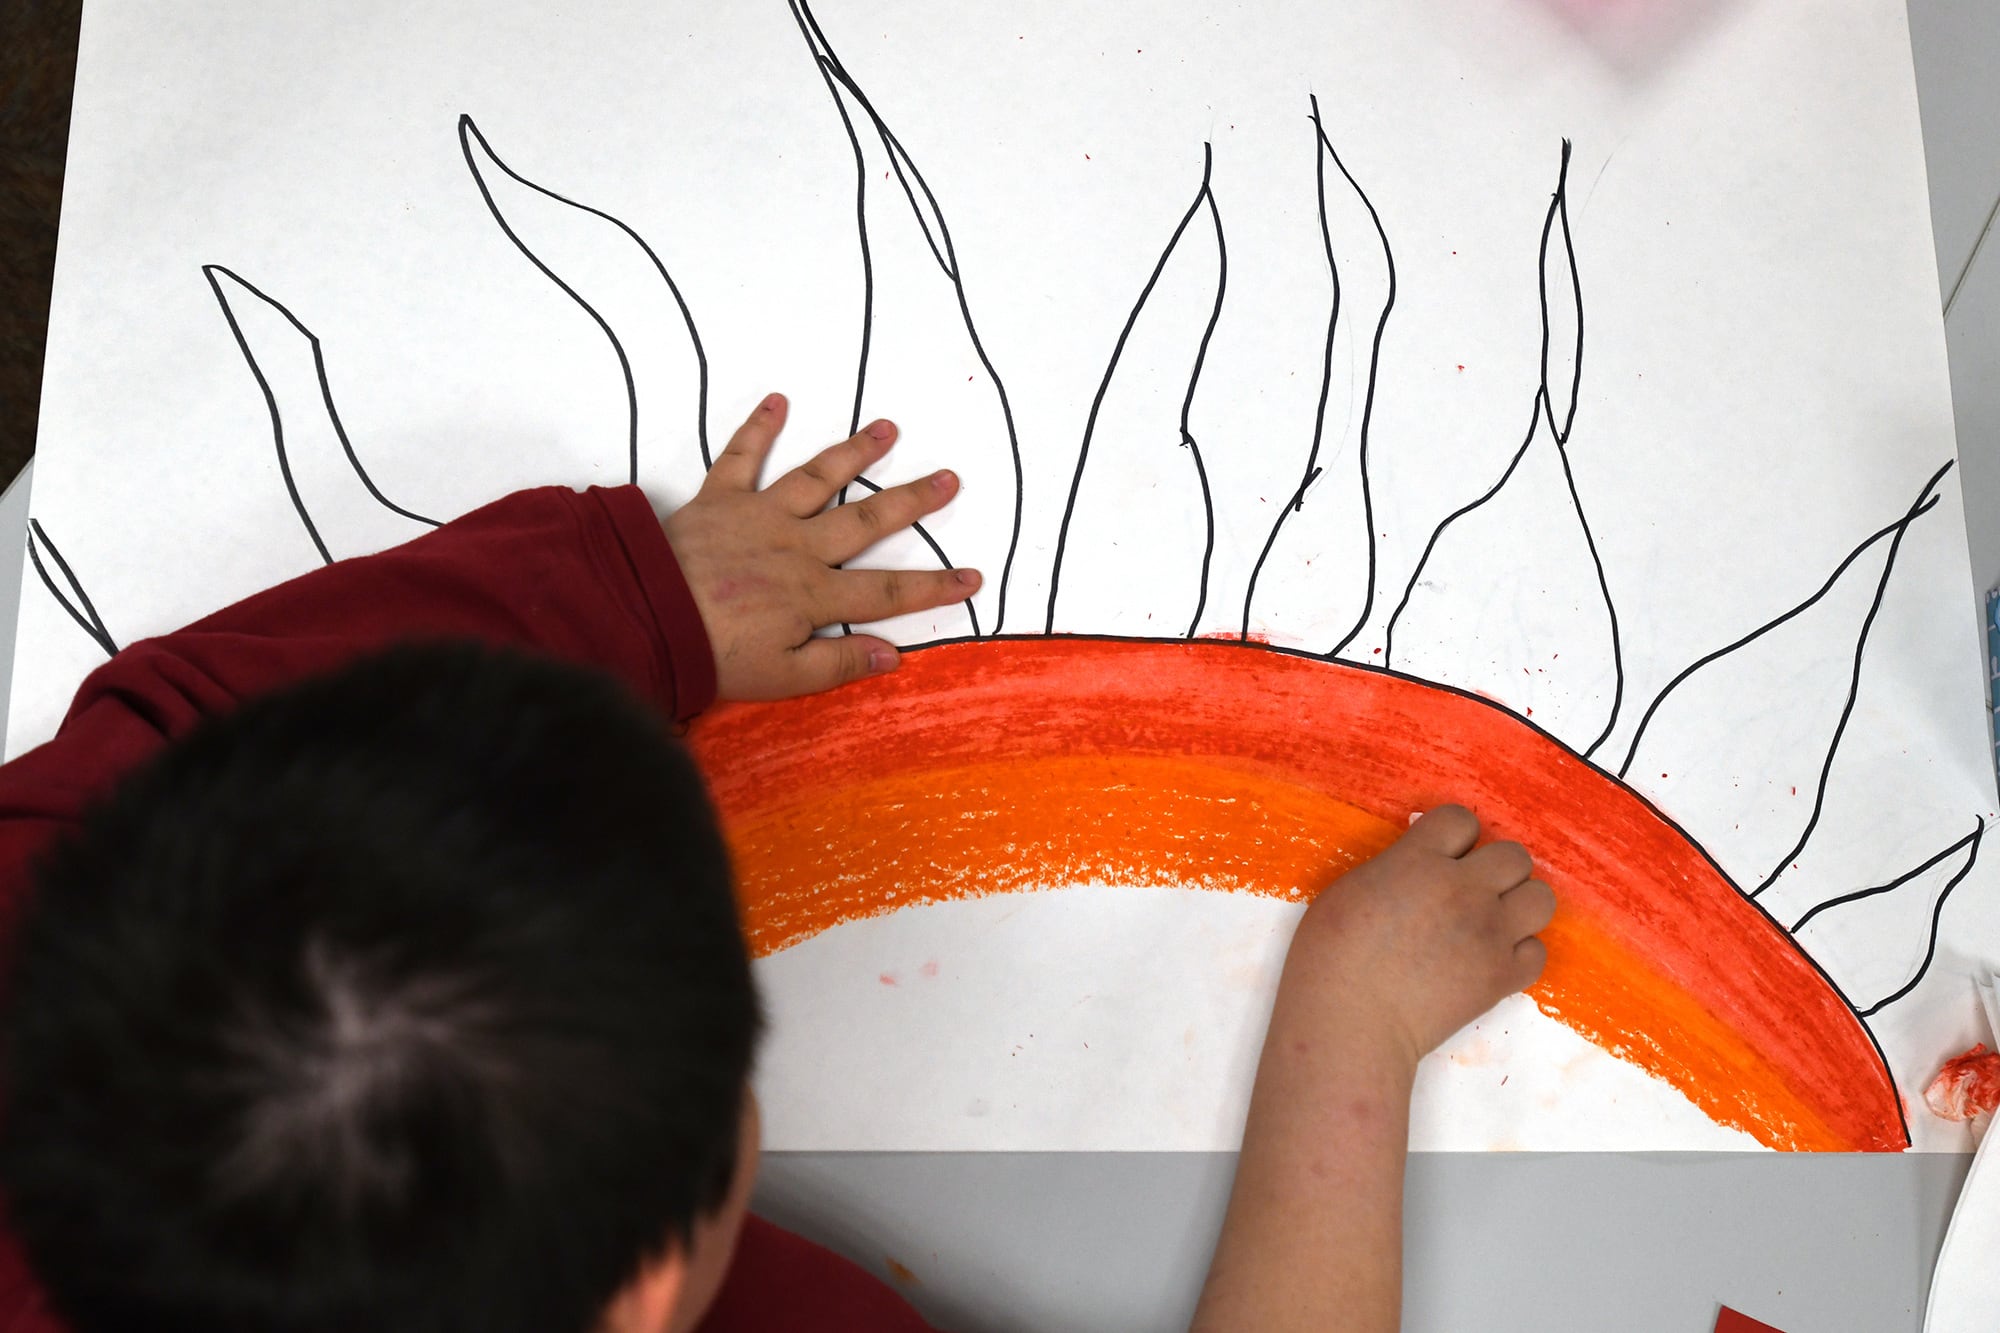 A dark-haired child is seen from above working on an art project. A half circle and rays depict a sun. The child is coloring a long orange arc.